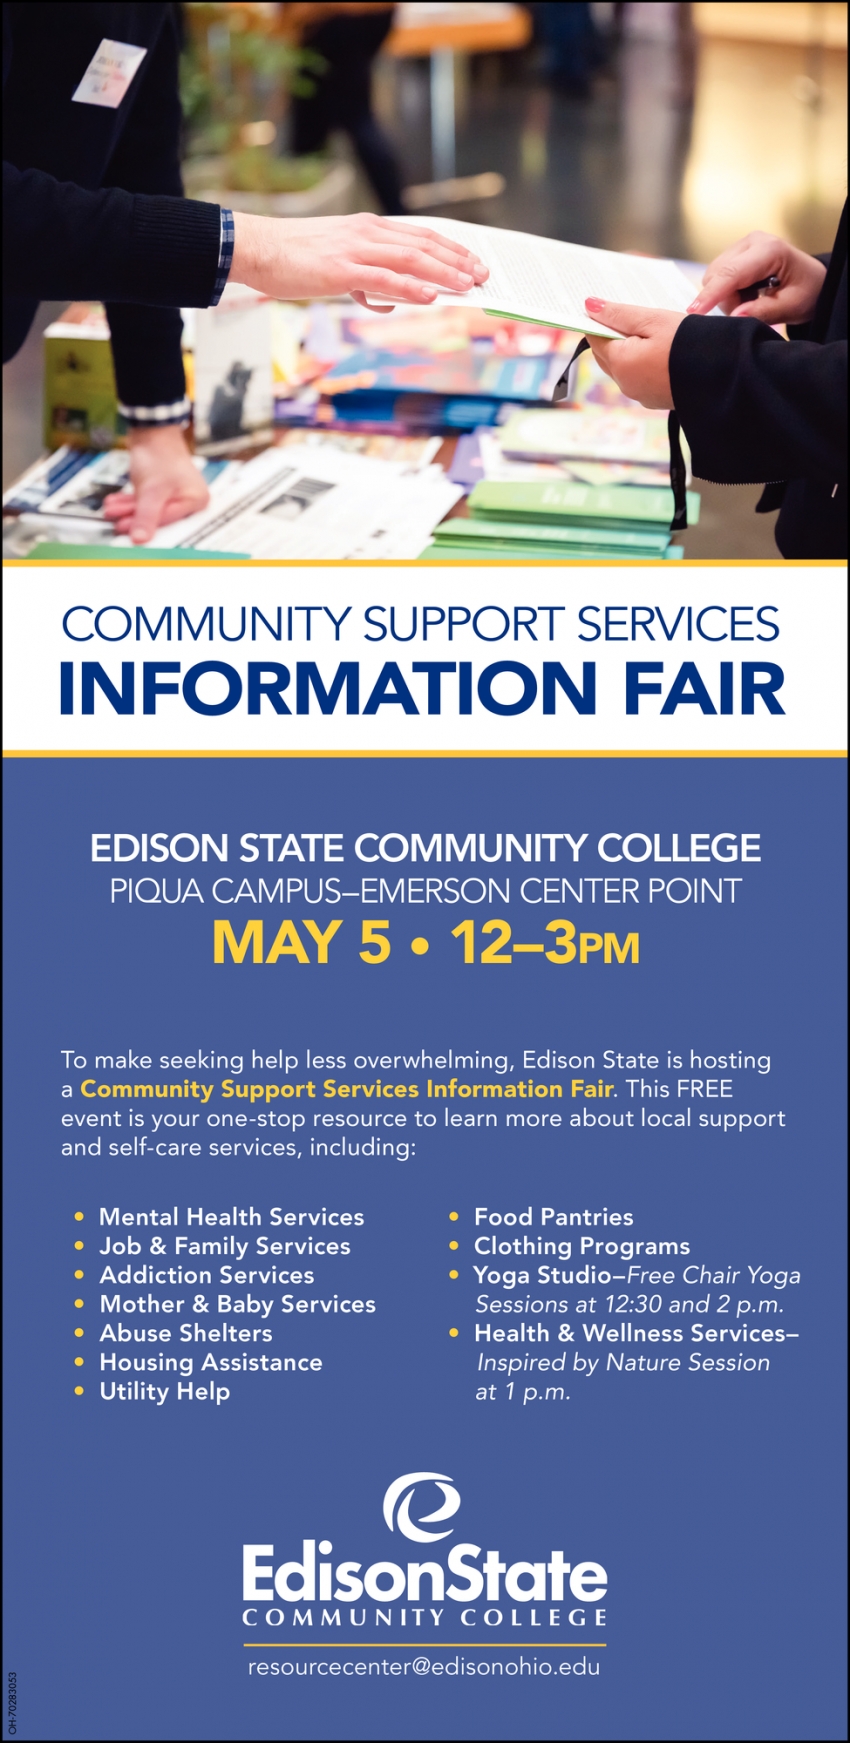 Community Support Services Information Fair